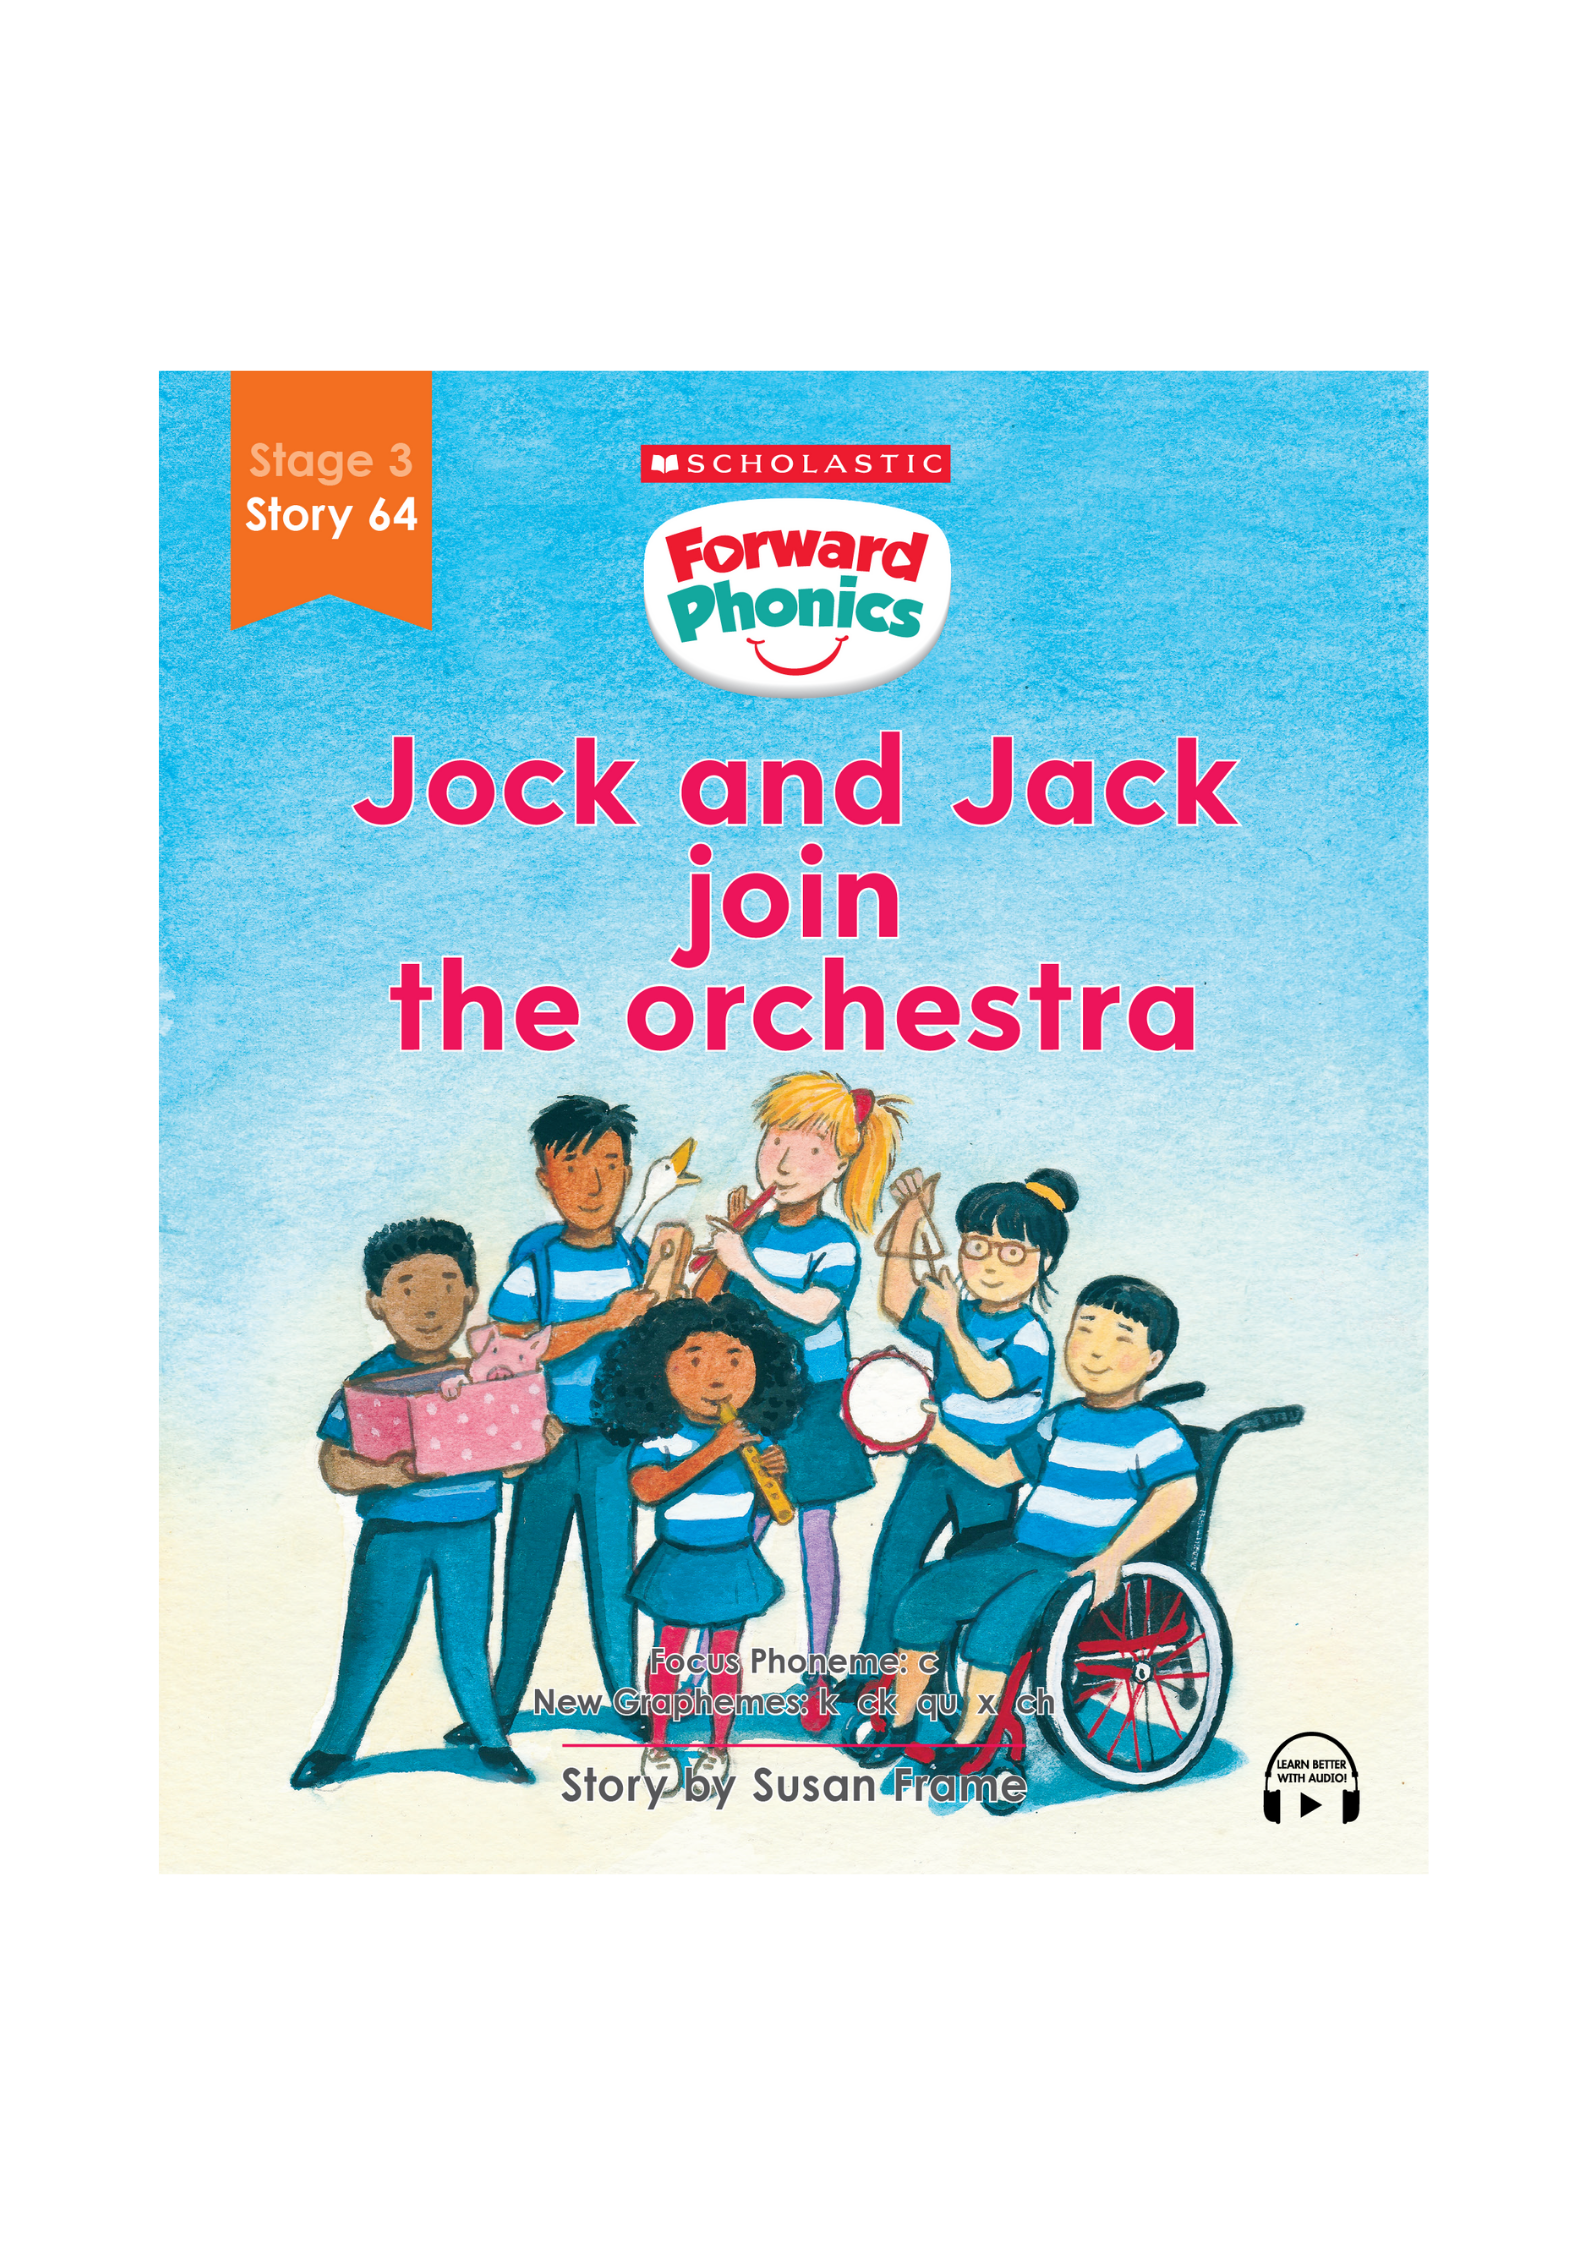 Forward Phonics #64: Jock and Jack Join the Orchestra